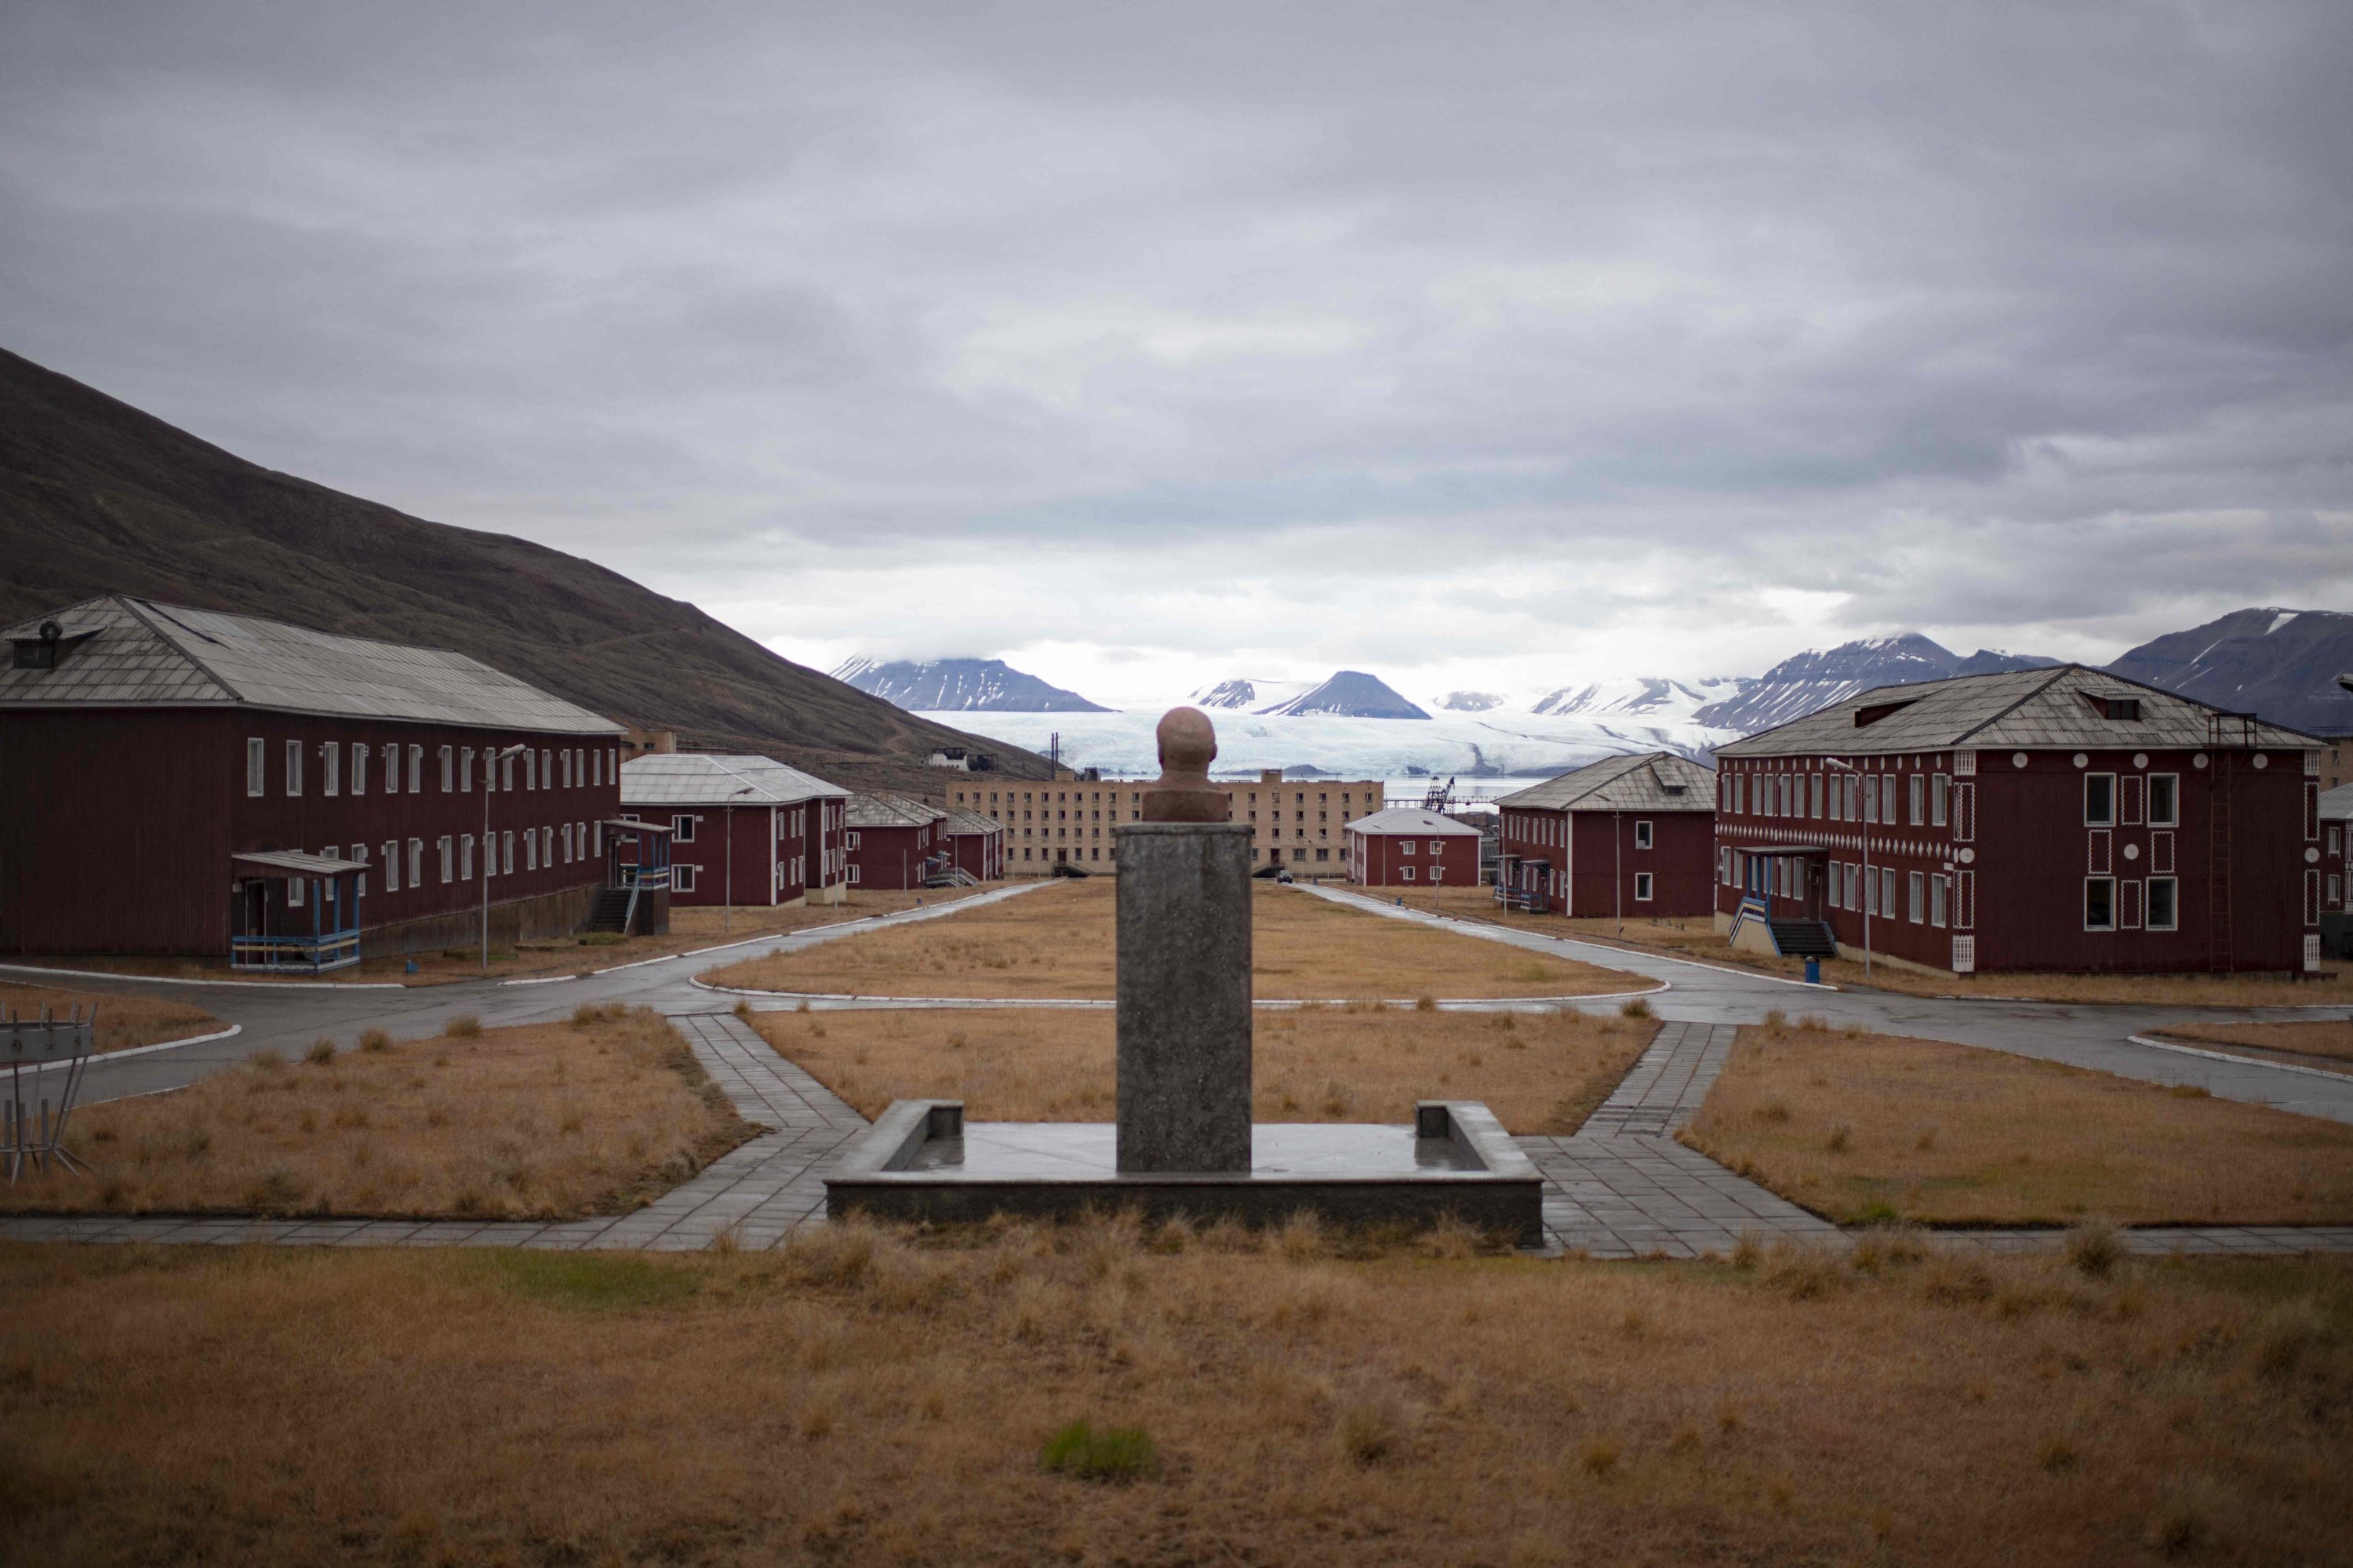 A general view shows a statue of Lenin in the middle of the abandoned ex-Soviet mining village of Pyramiden, in front of the glacier Nordenskioldbreen in Svalbard, Norway, Sept. 21, 2021. (AFP Photo)